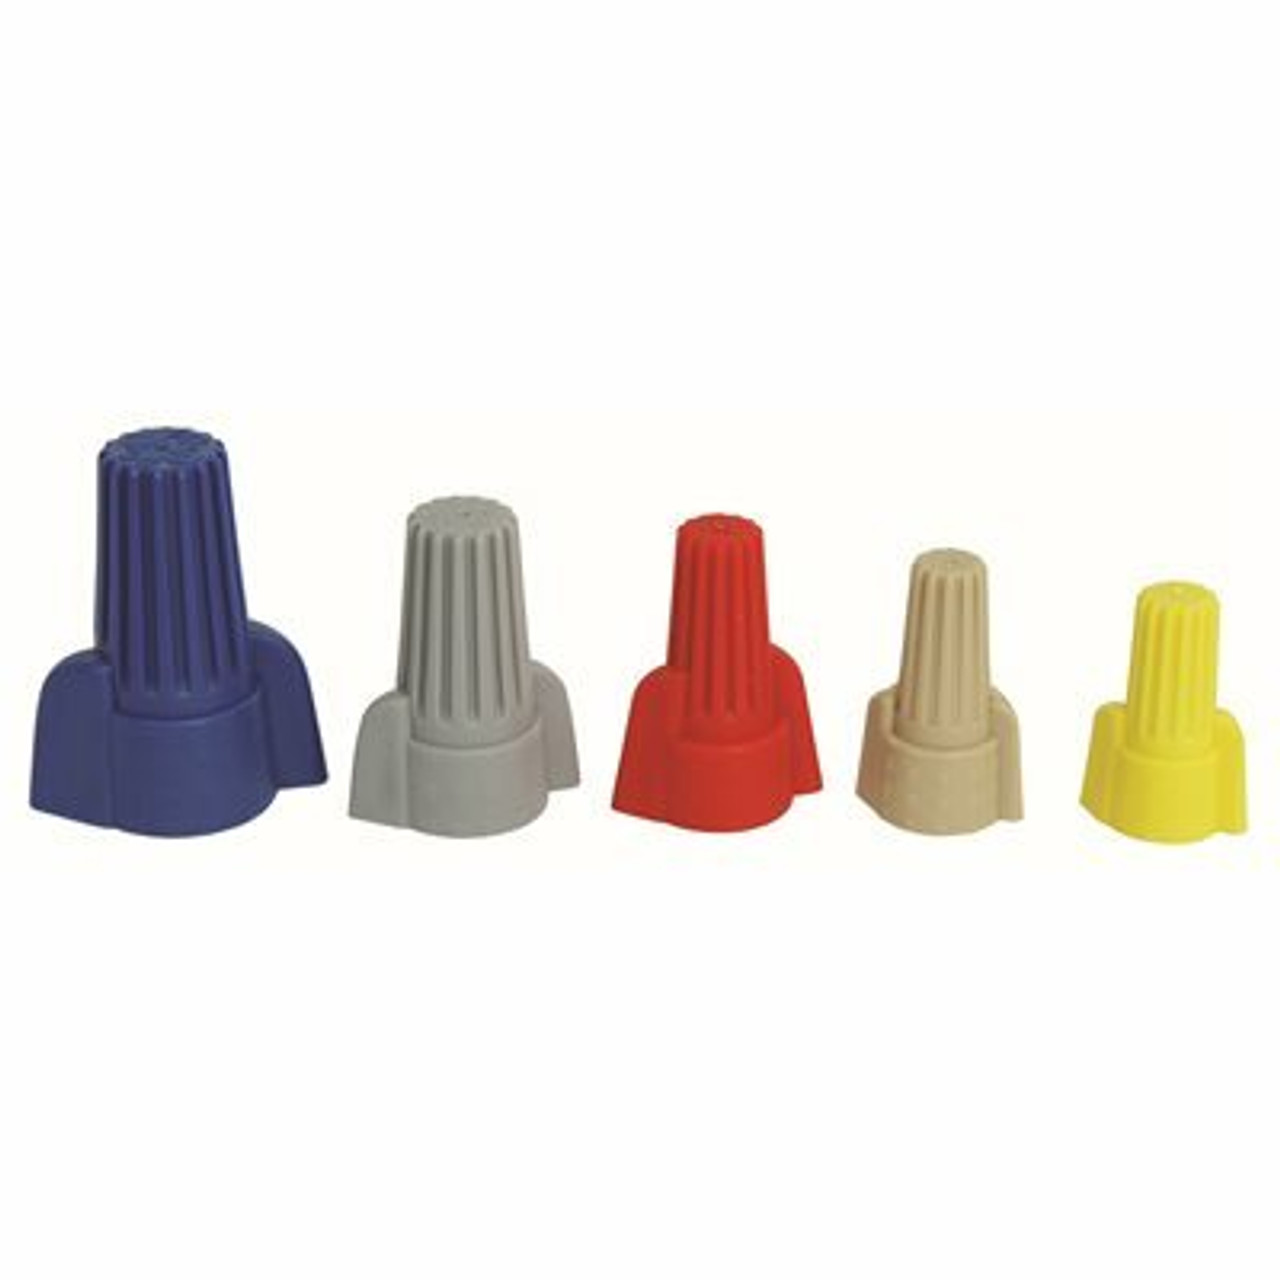 Preferred Industries Assorted Wire Connectors (24-Pack)